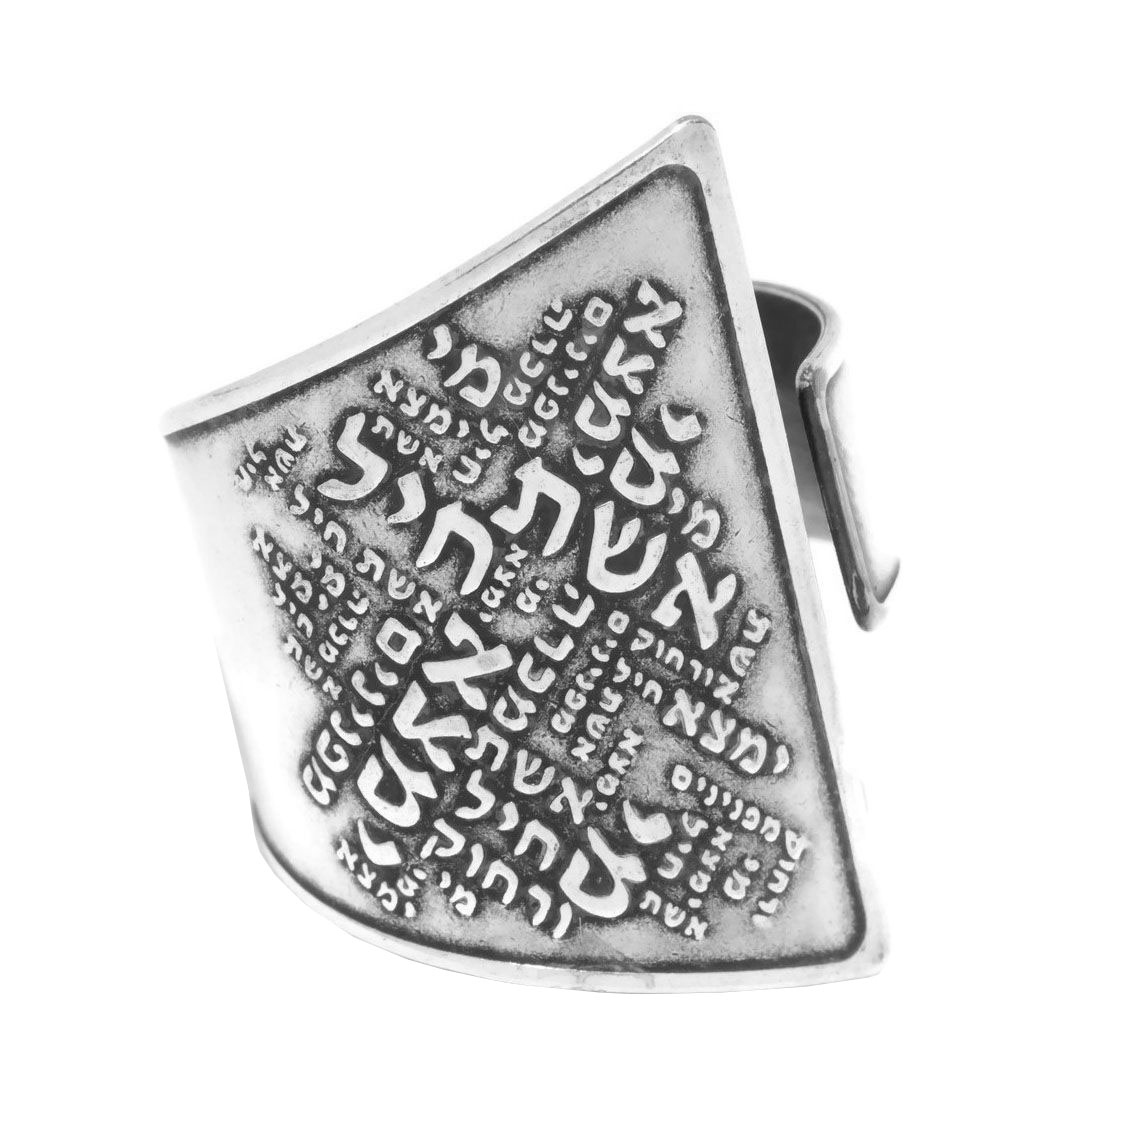 Blackened 925 Sterling Silver Adjustable Woman of Valor Cuff Ring (Proverbs 31) - 1